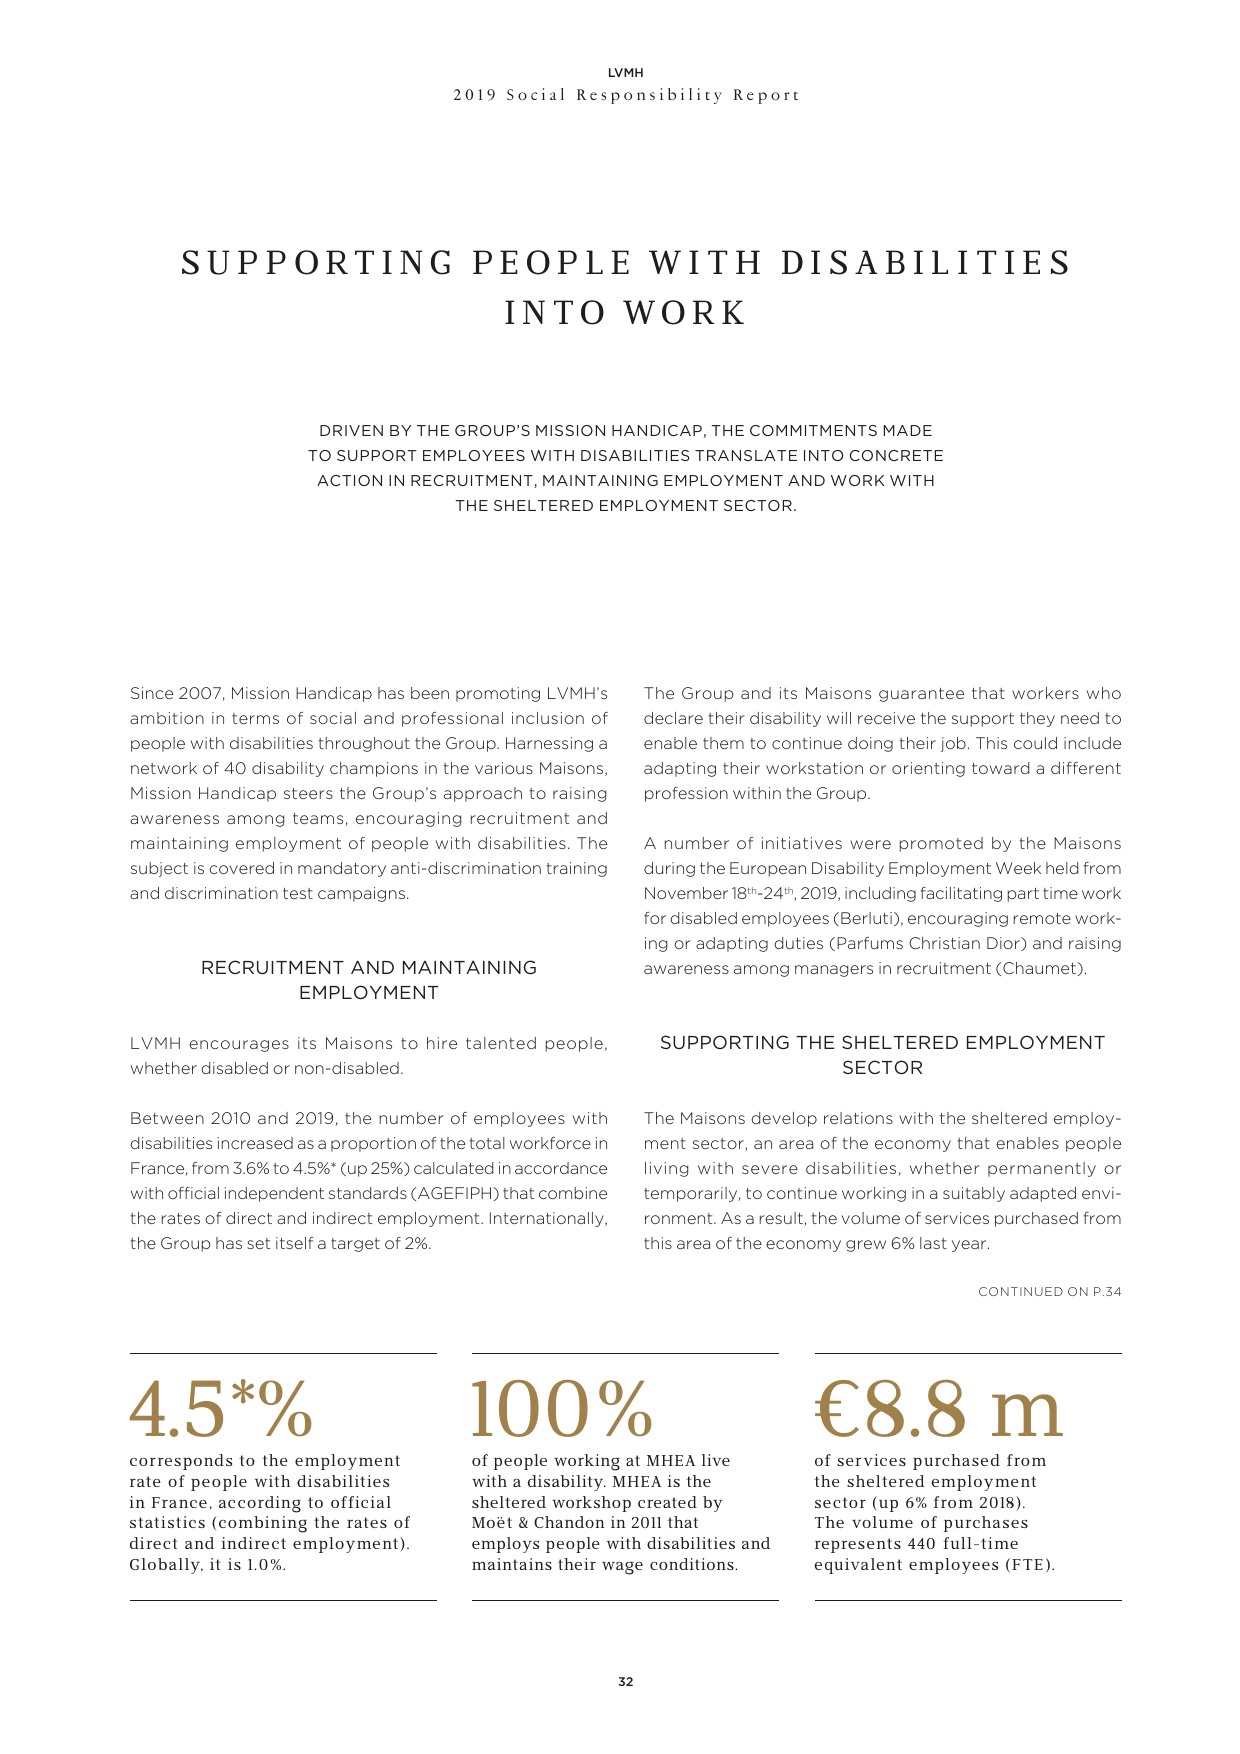 LVMH - Support for people with disabilities, whether temporary or